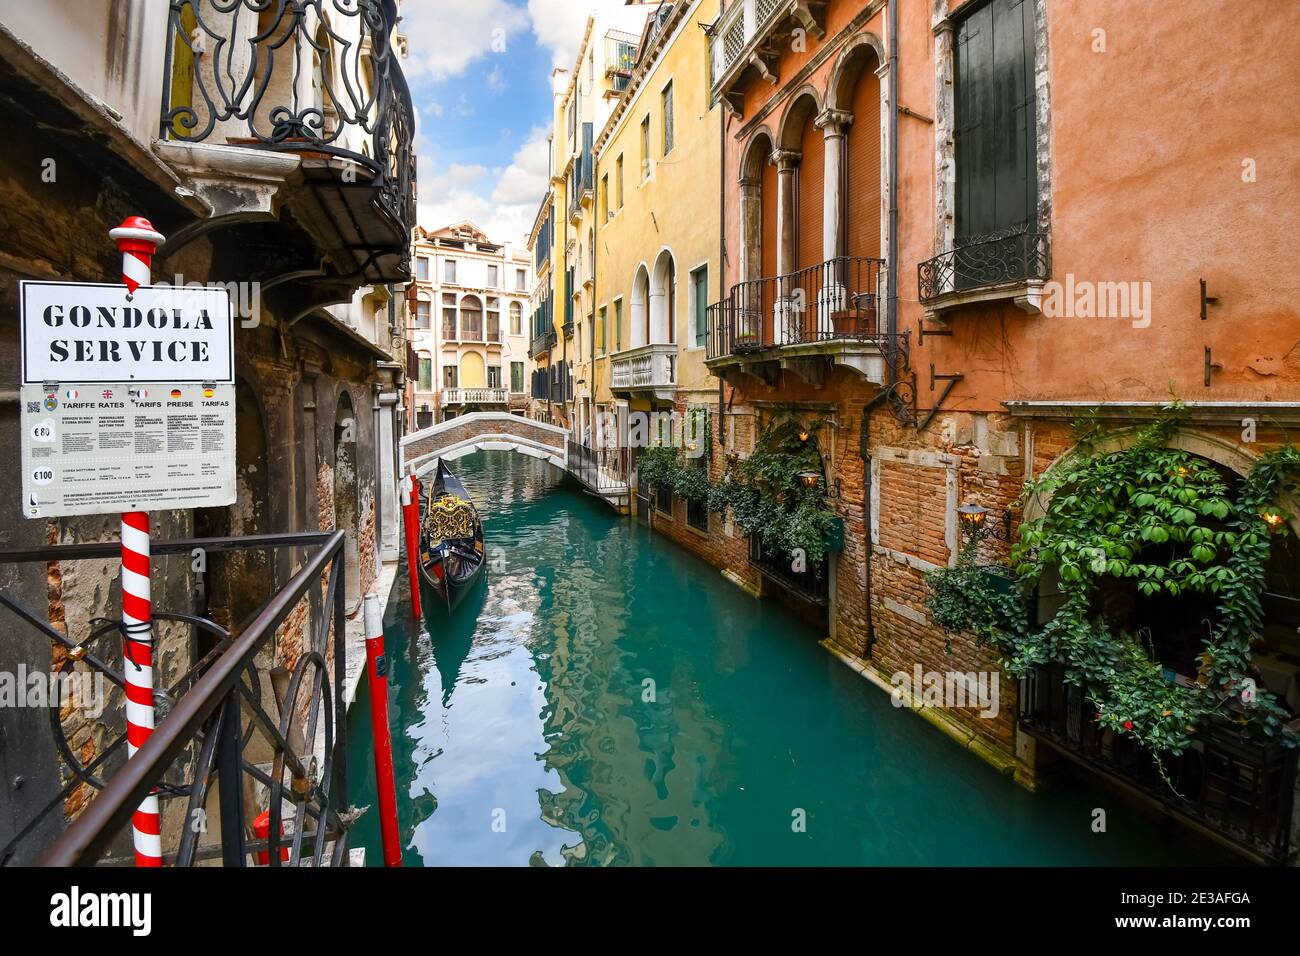 An empty gondola waits for tourists at a station on a colorful, narrow alley with a bridge and price sheet in Venice, Italy. Stock Photo